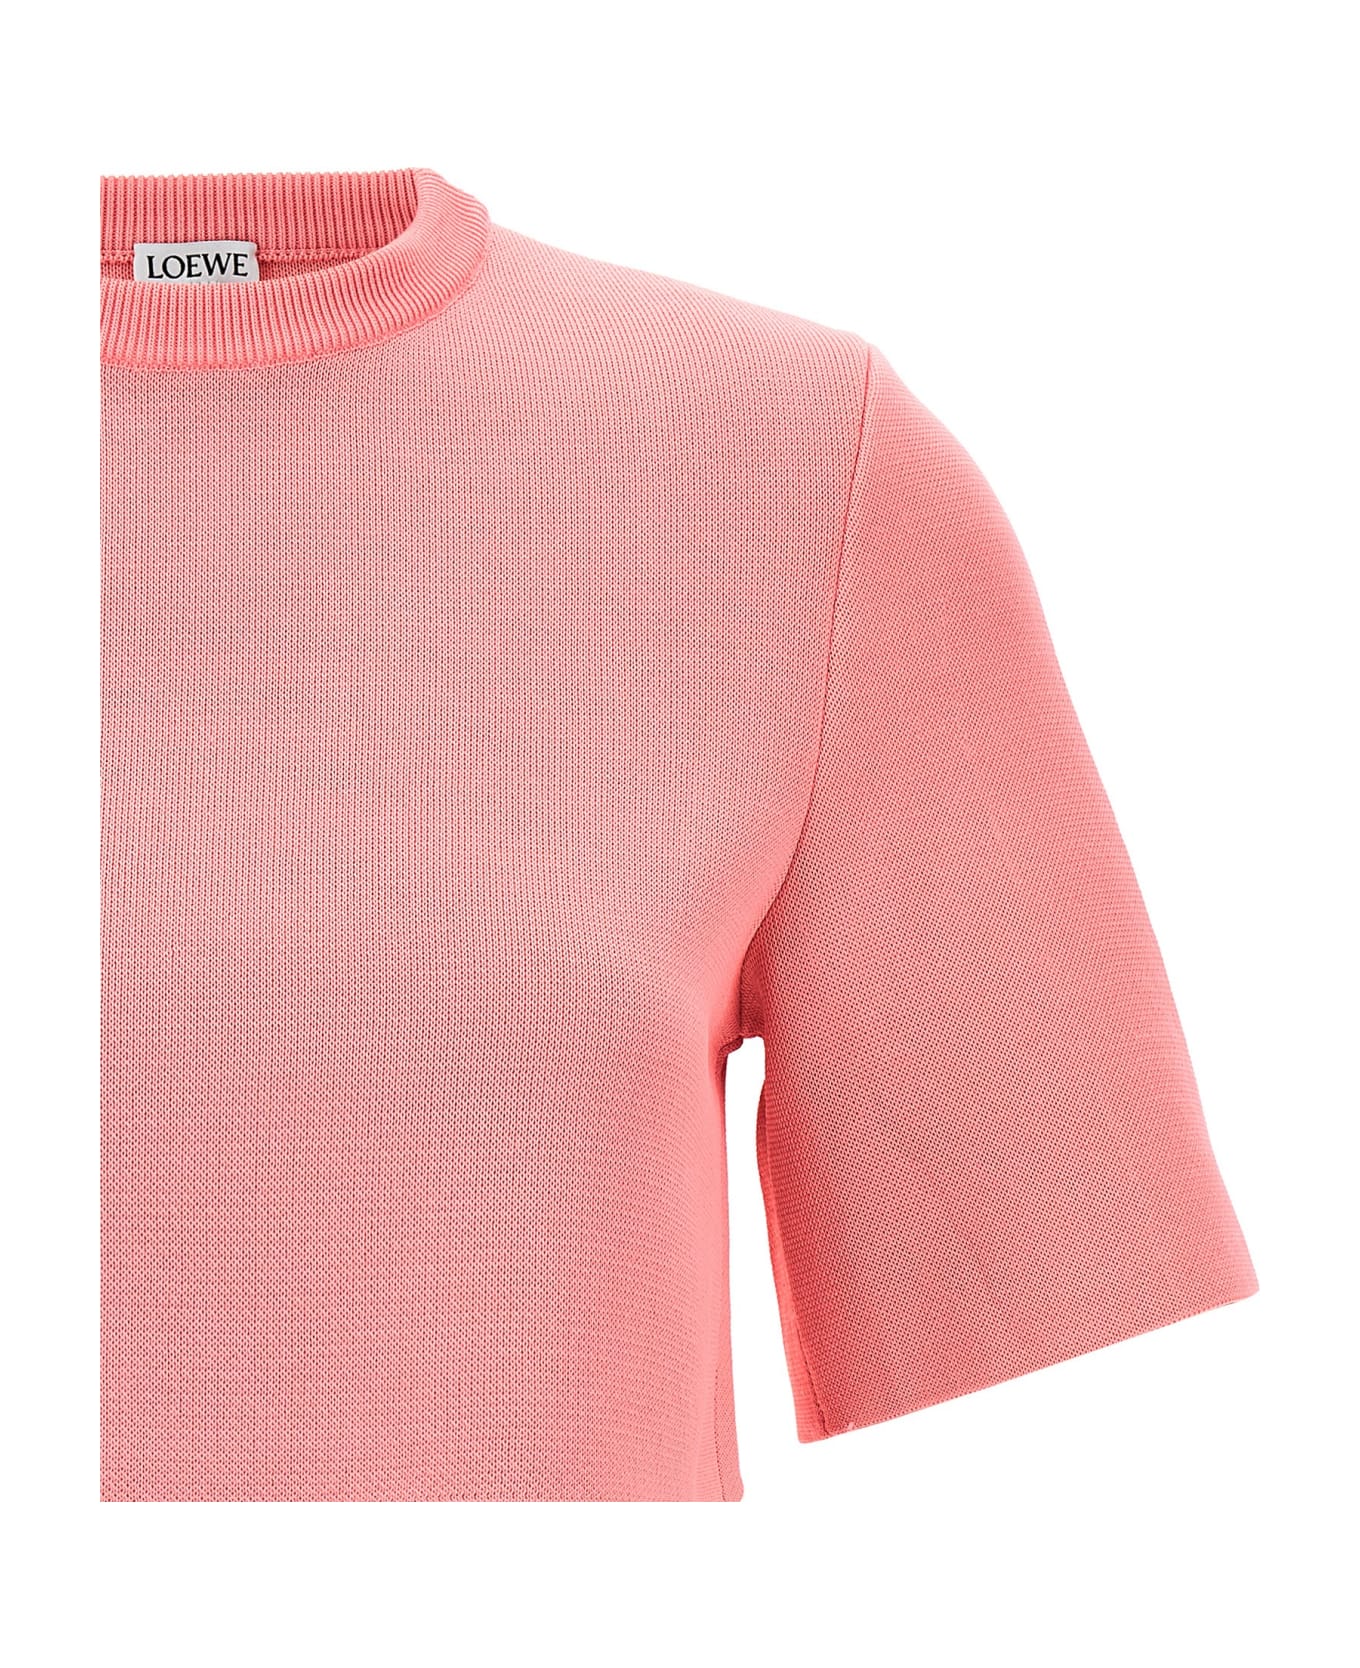 Loewe 'reproportioned' Cropped Top - Pink トップス